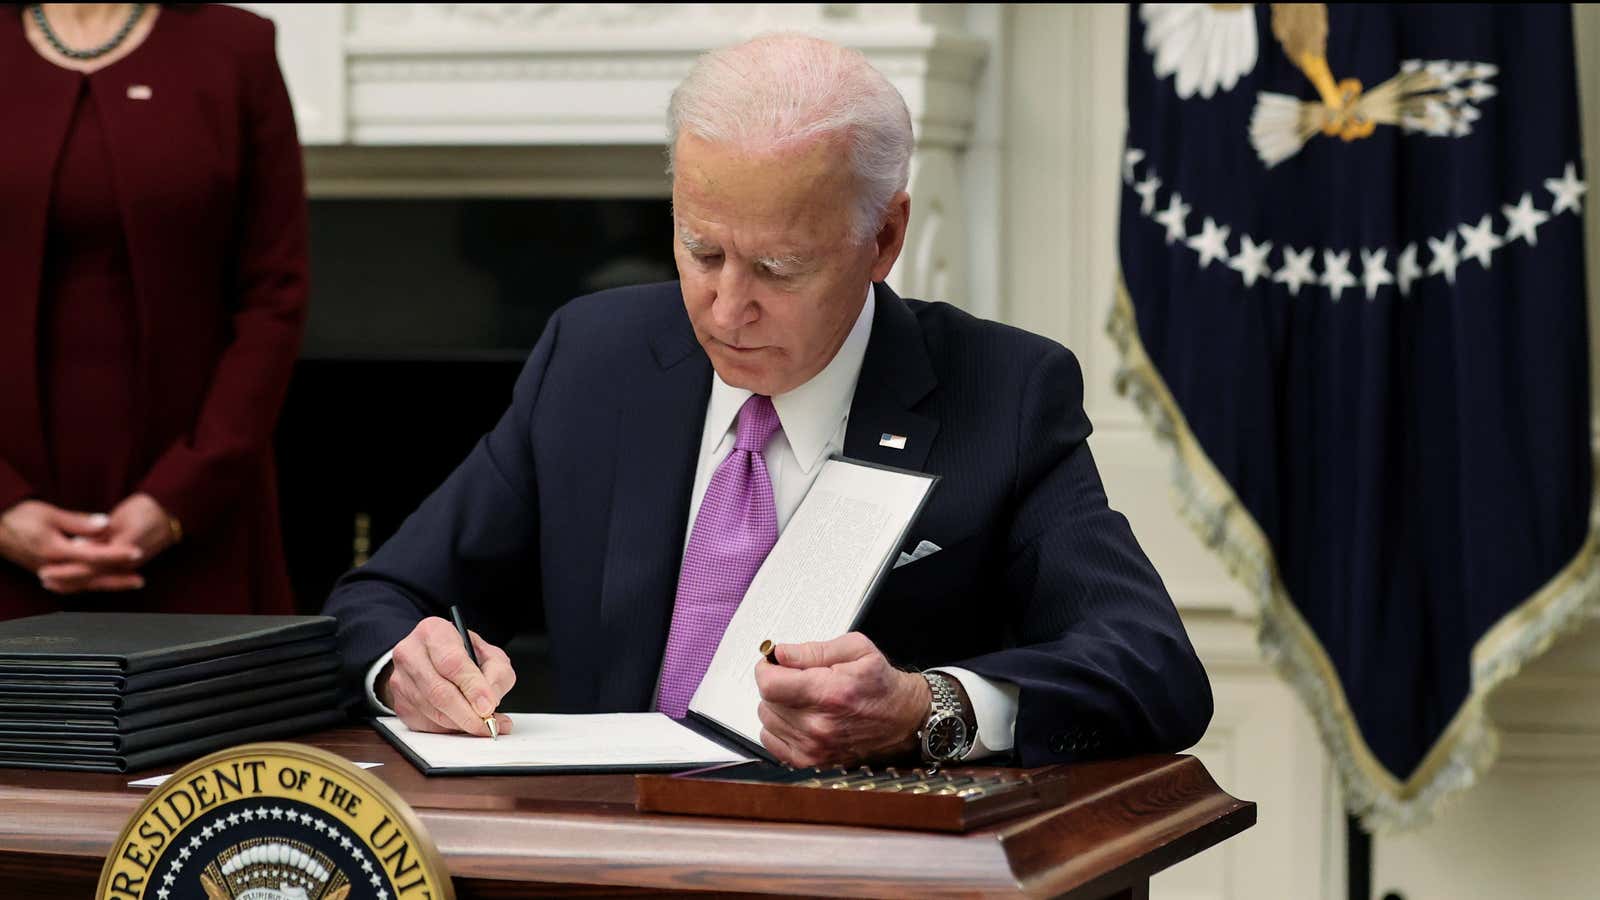 U.S. President Joe Biden signs an executive order as part of his administrationâ€™s plans to fight the coronavirus disease (COVID-19) pandemic during a COVID-19 responseâ€¦